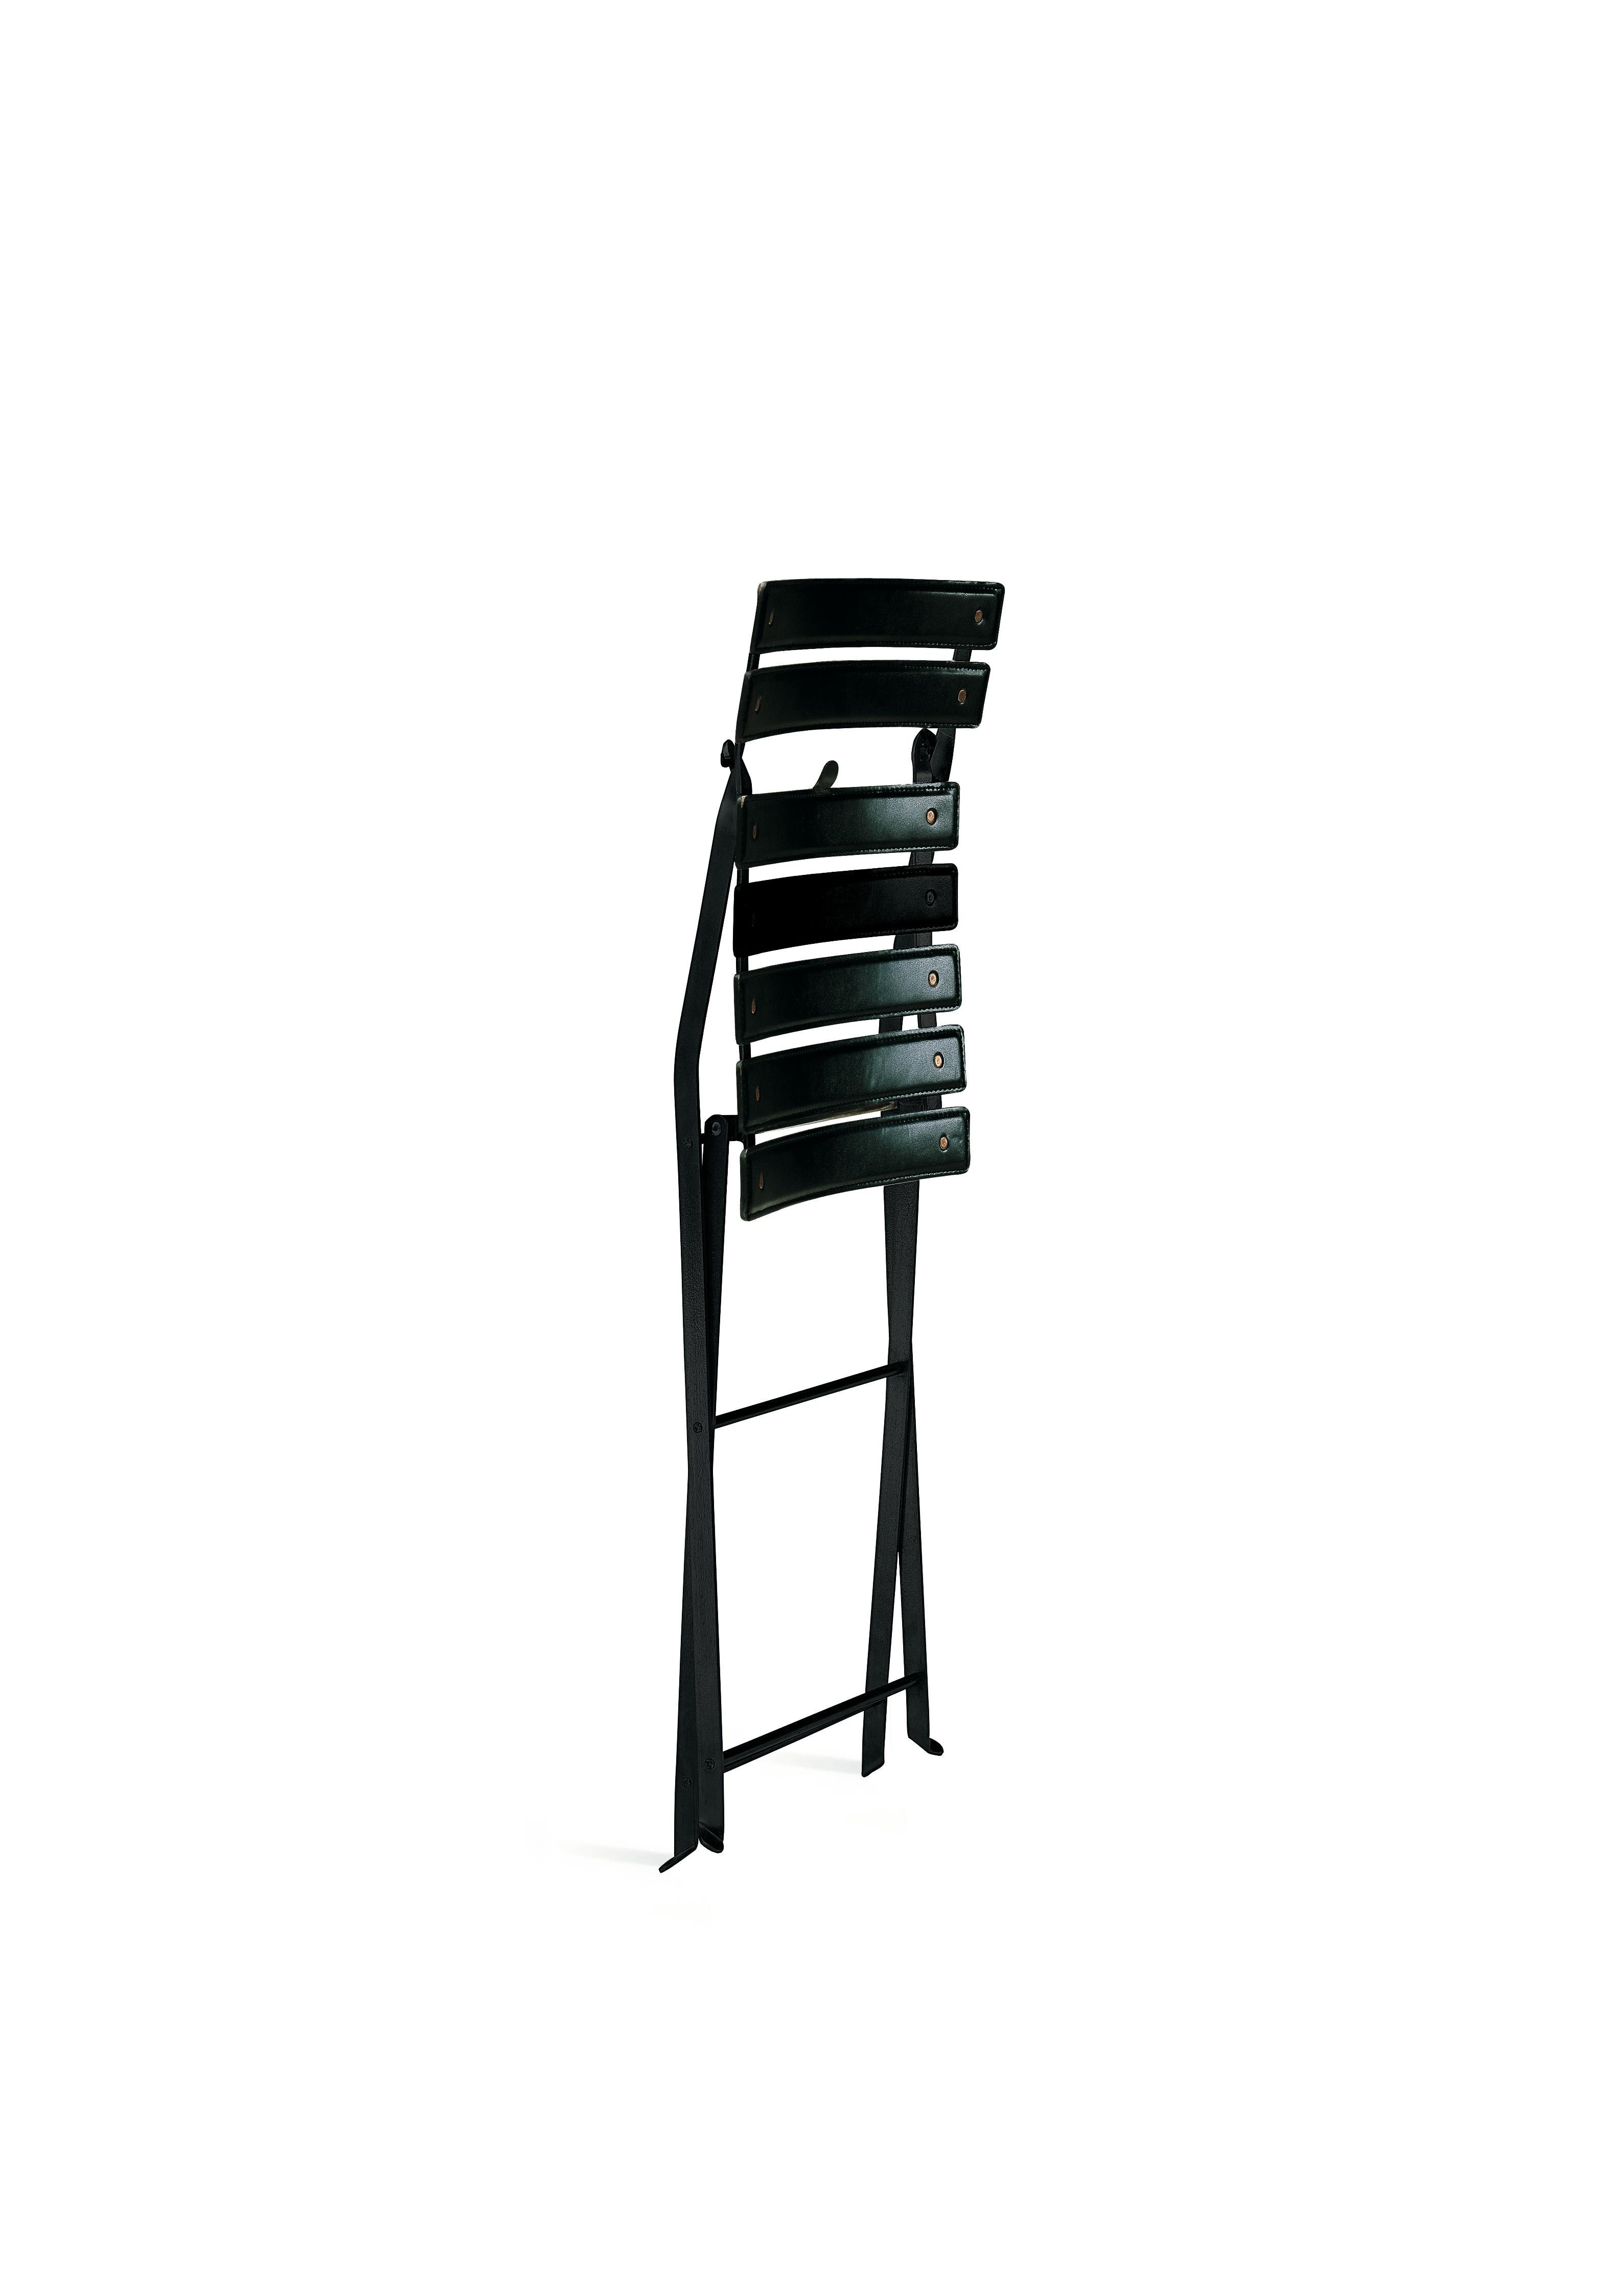 Zanotta Celestina Folding Chair in Black Painted Steel Frame by Marco Zanuso

Frame in black or white painted steel. Nylon seat and back covered in cowhide 95.

Additional Information:
Material: Steel, nylon
Frame finish: Black painted